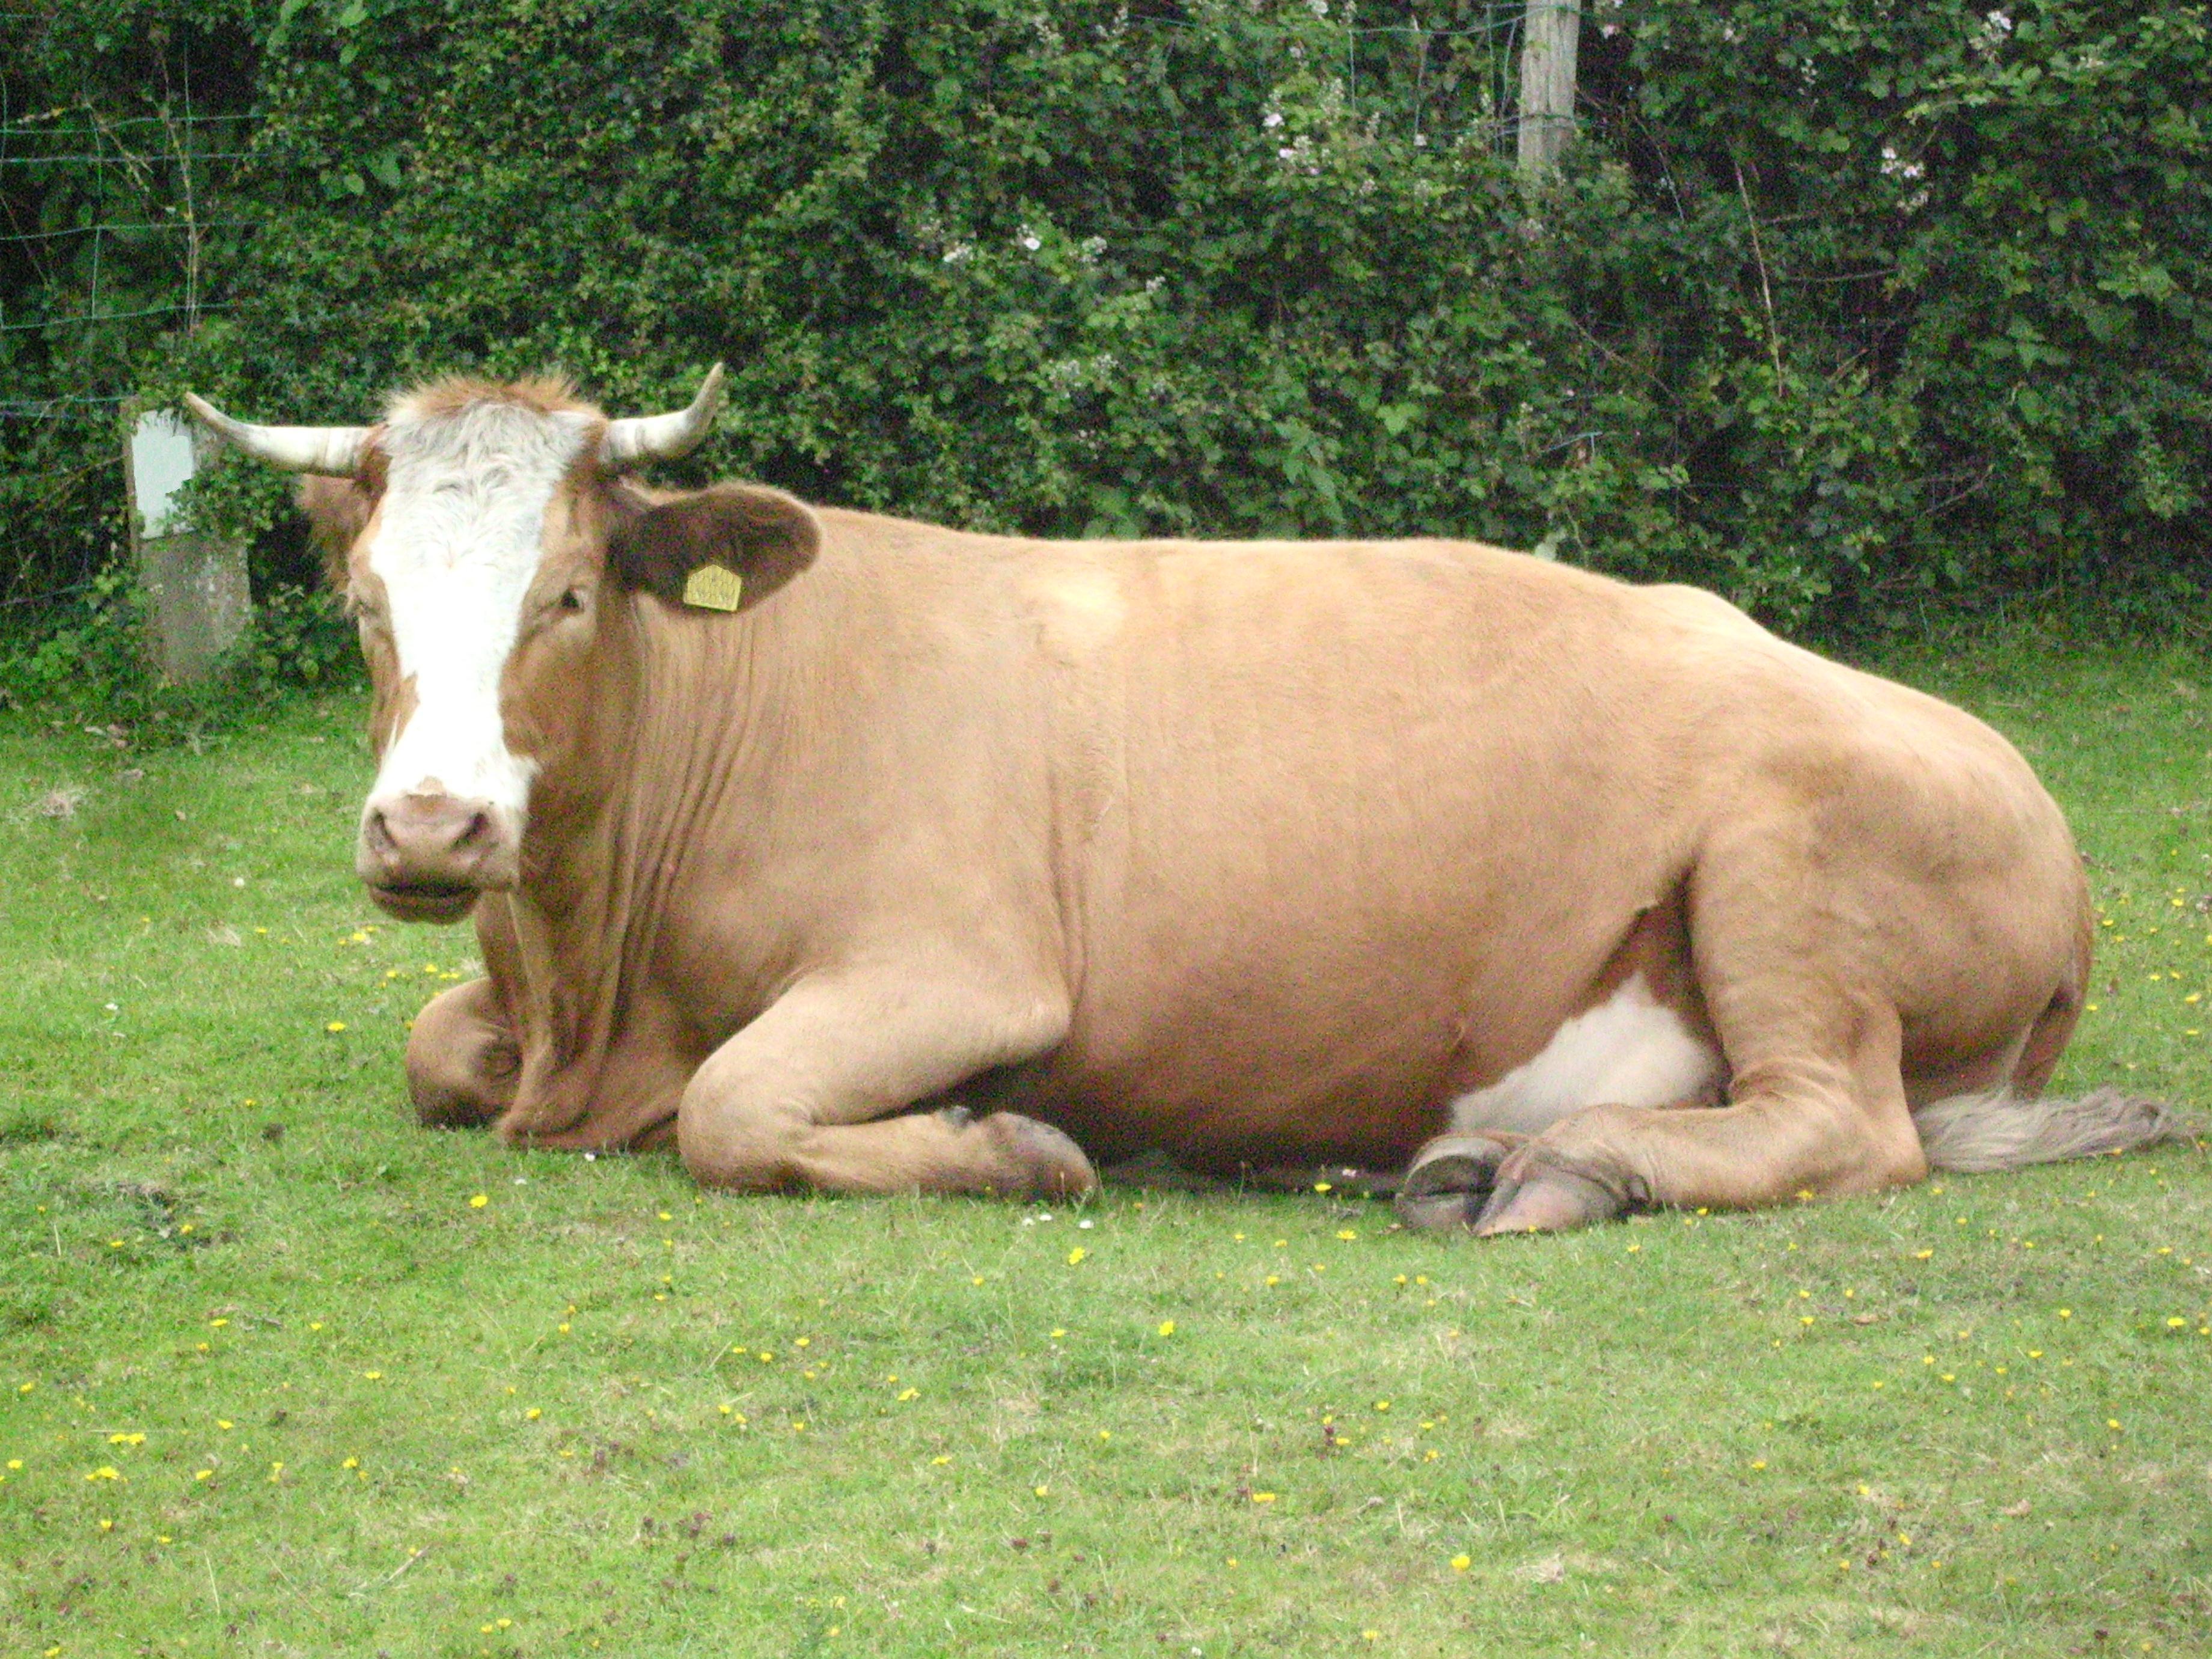 Today's Cow is resting her neck | The Daily Donkey